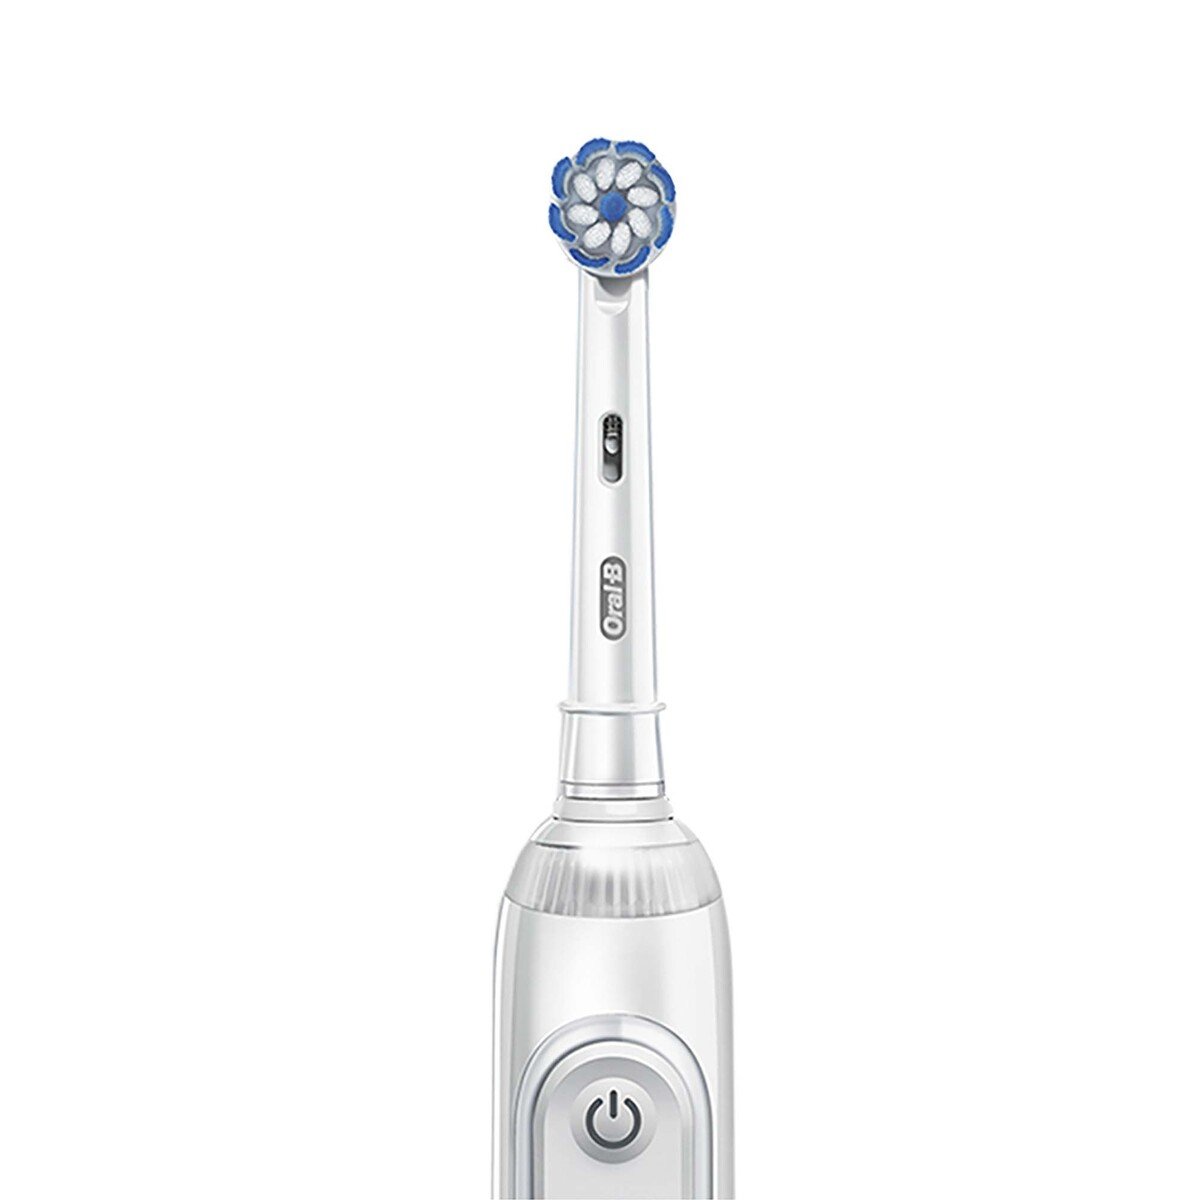 Oral-B Rechargeable Artificial Intelligence Toothbrush GeniusX 20100S